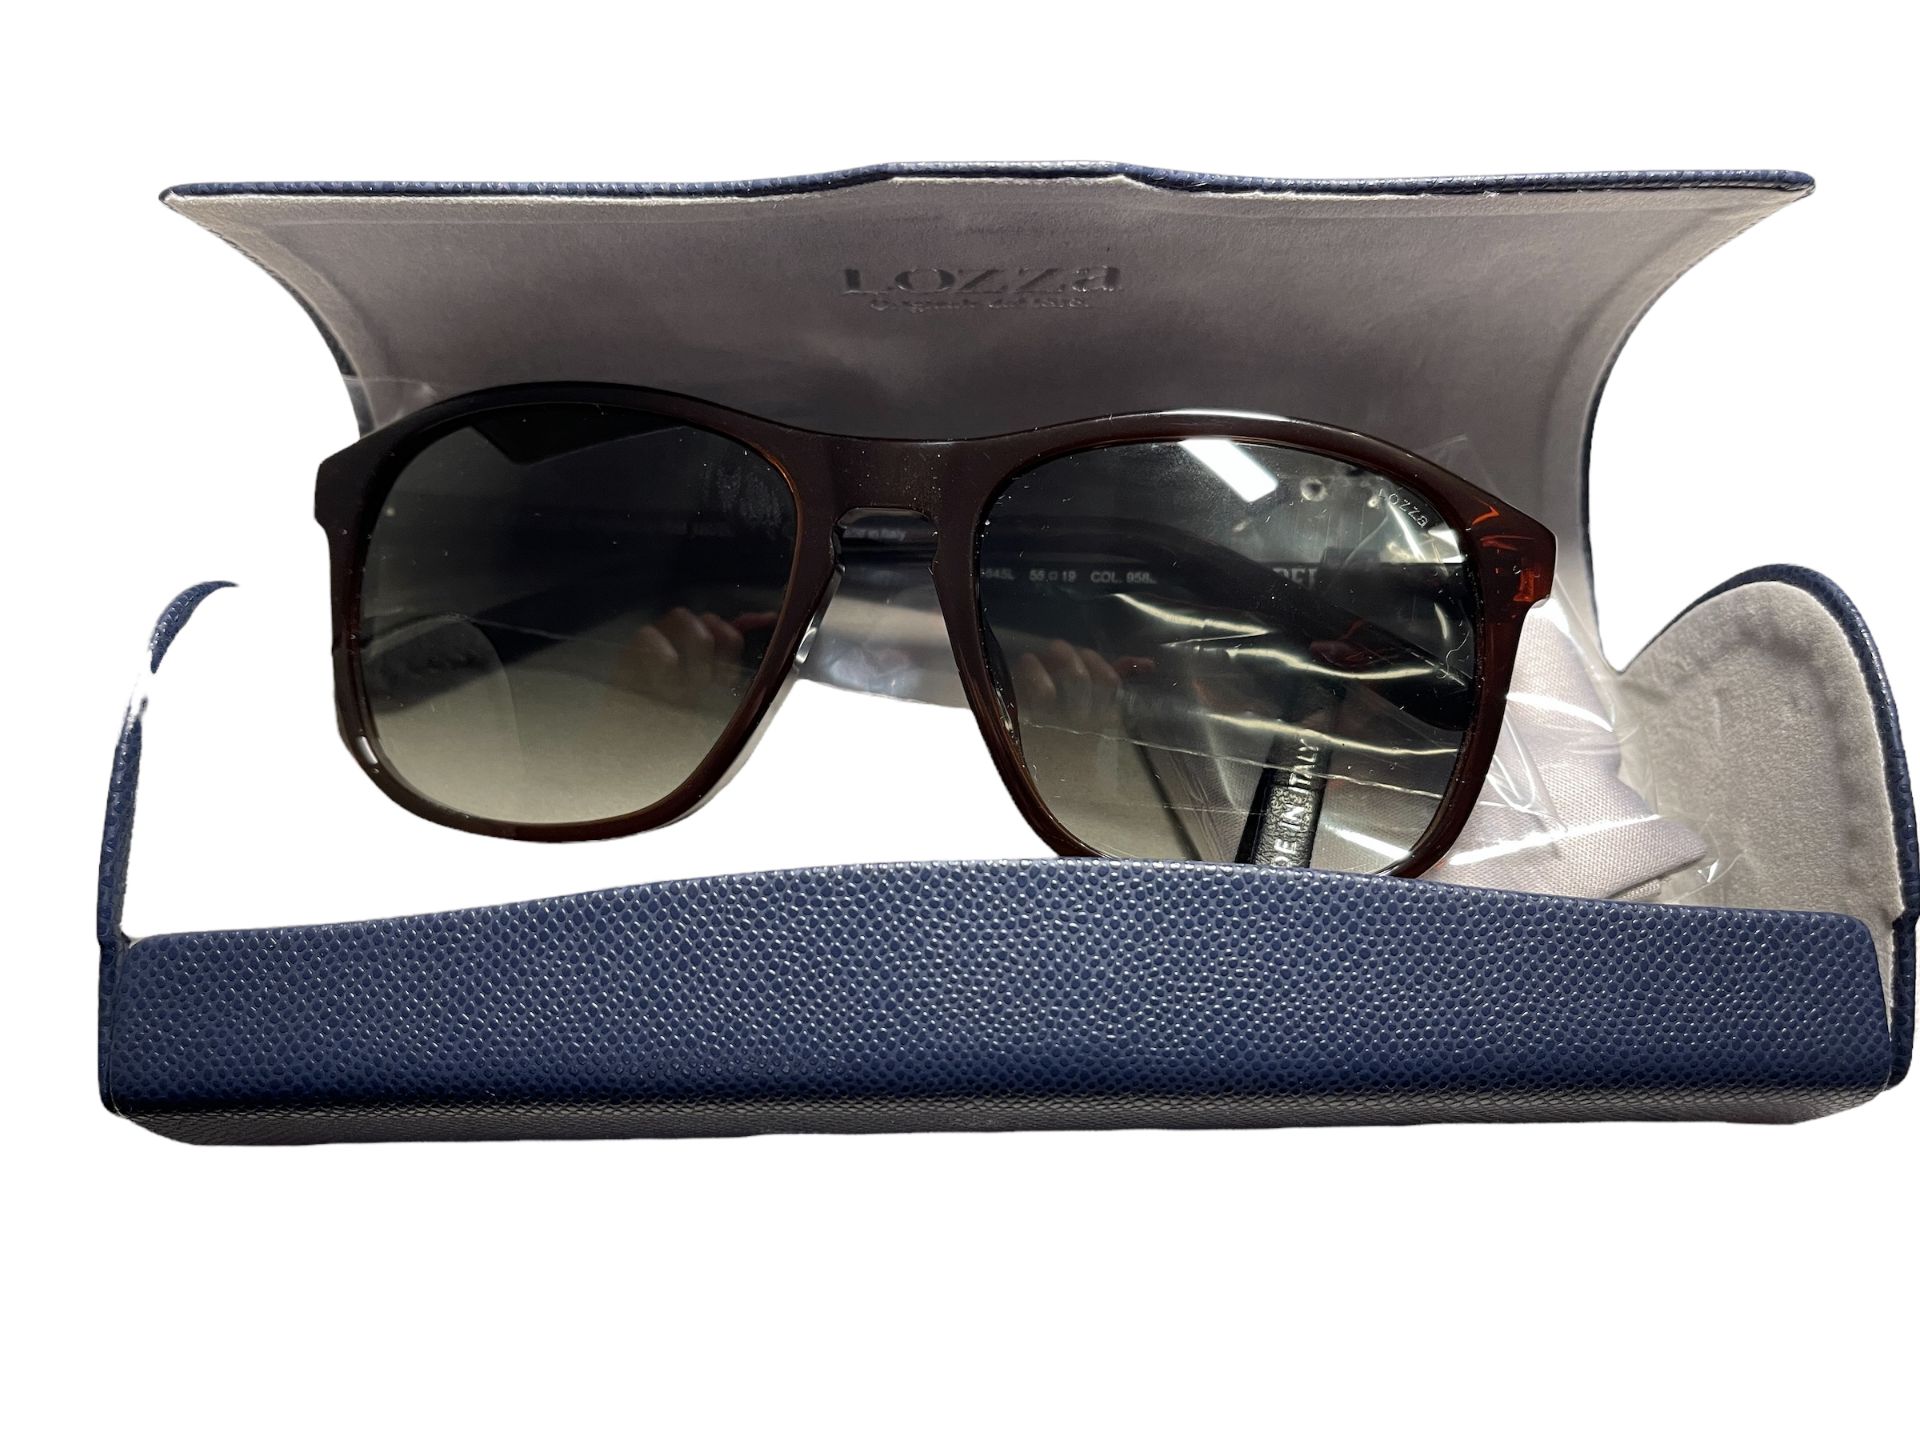 Lozza COOPER Unisex Sunglasses - Surplus Stock from our Private Jet Charter - Image 8 of 8